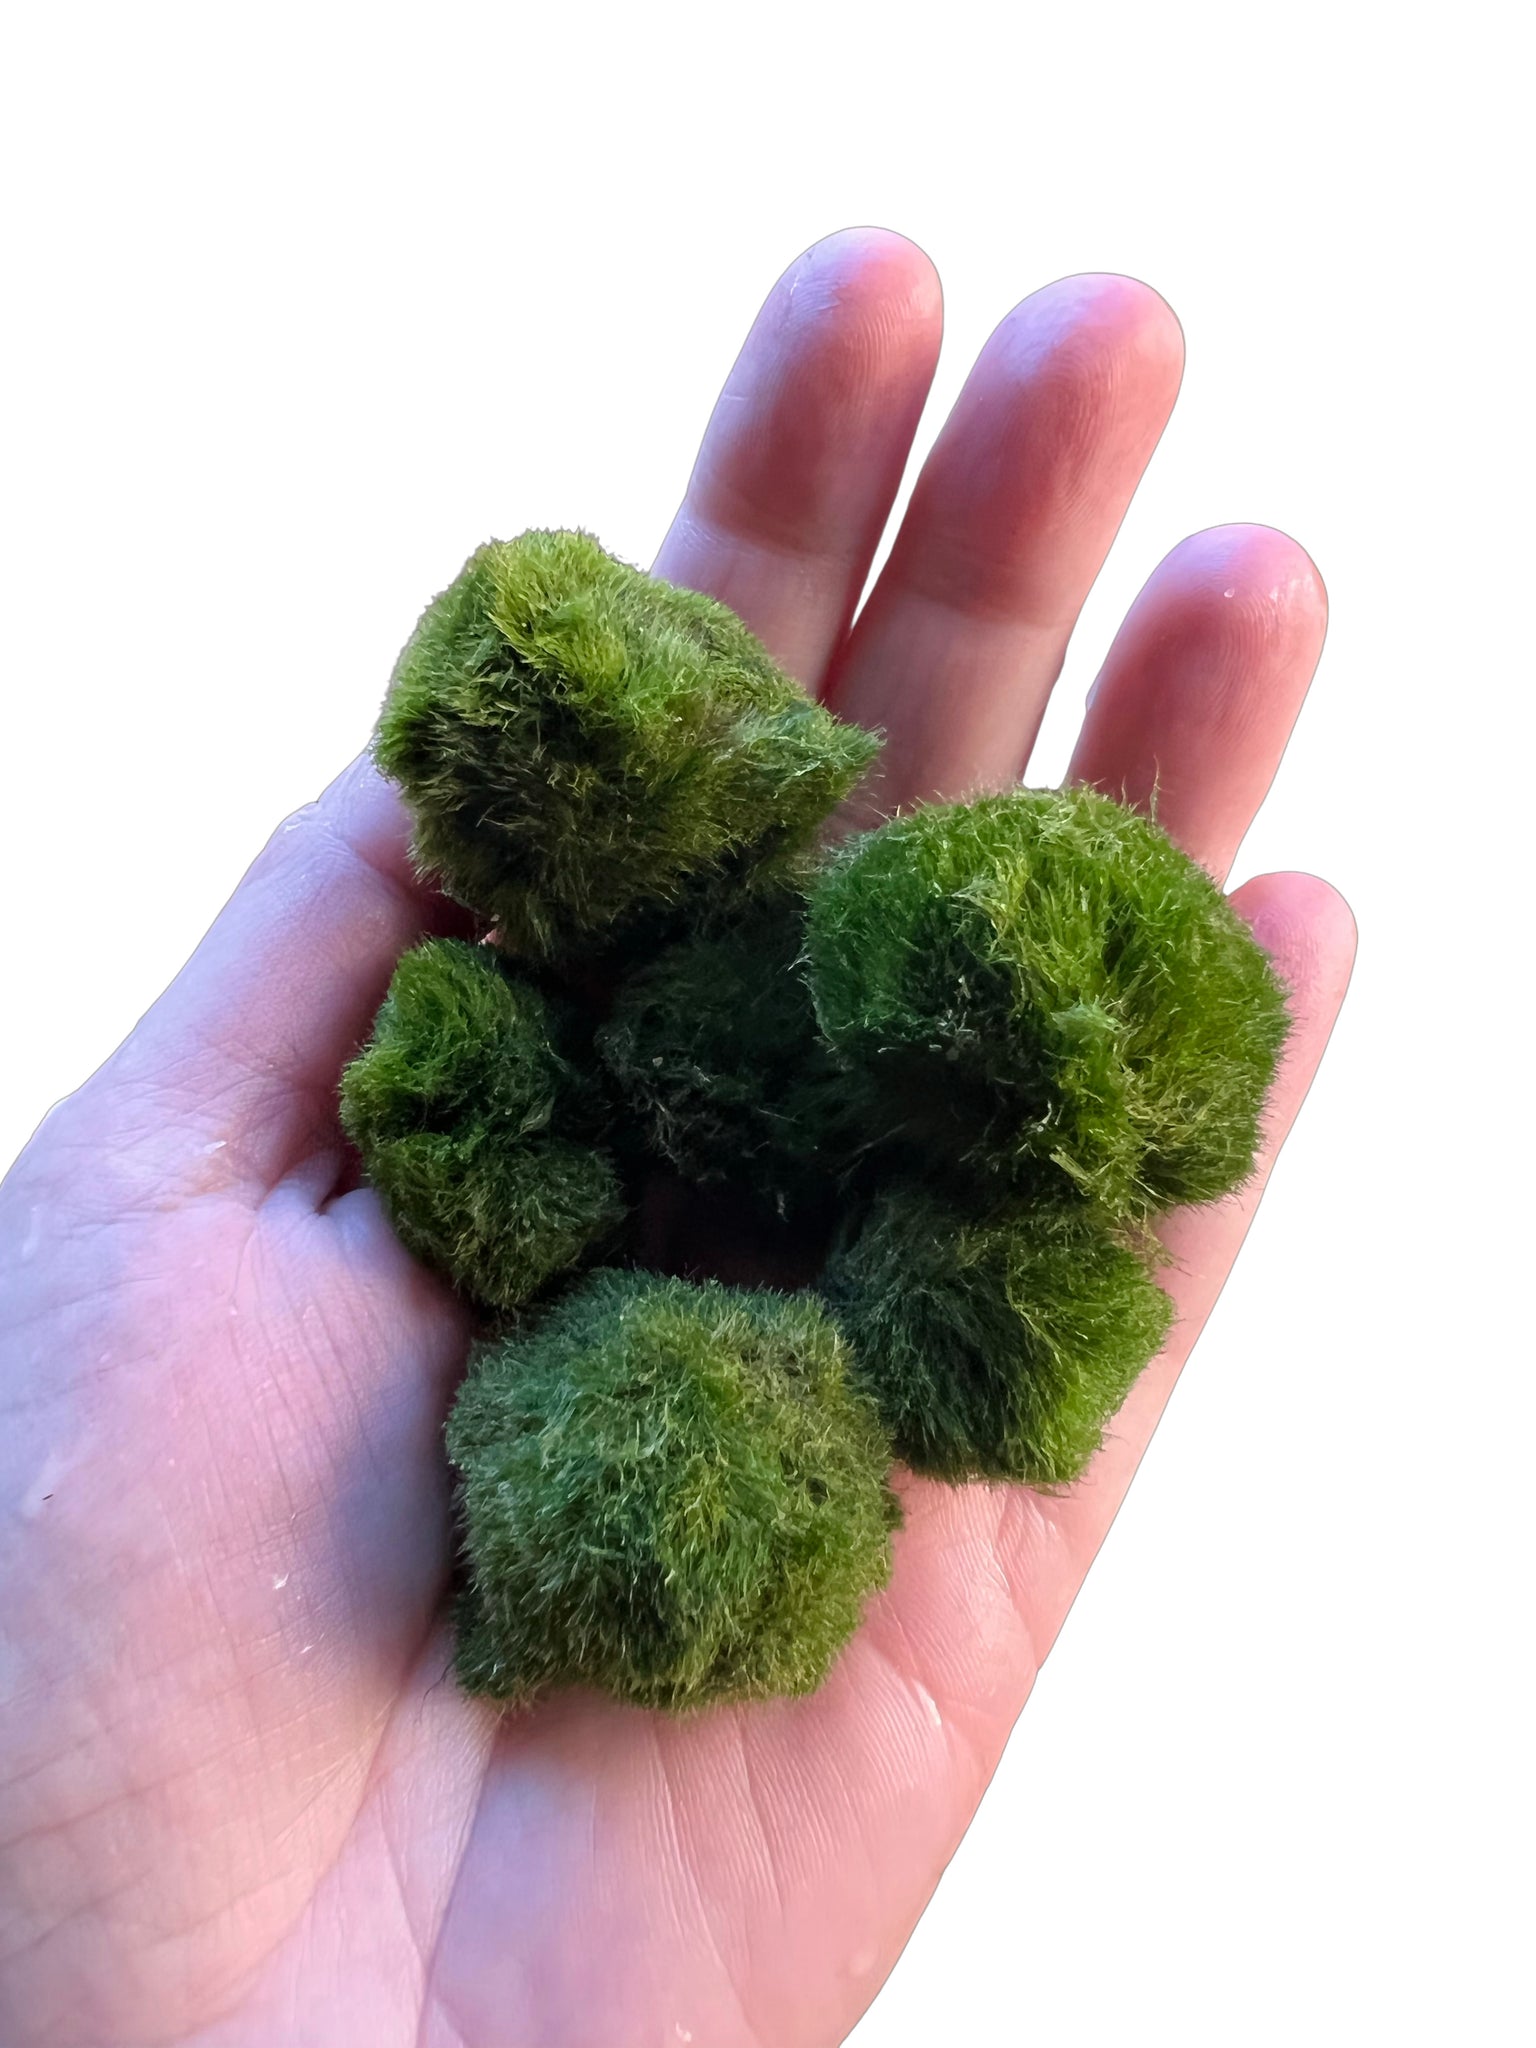 Marimo moss balls Live aquarium plant 1” (Remember to order heat packing if  needed)